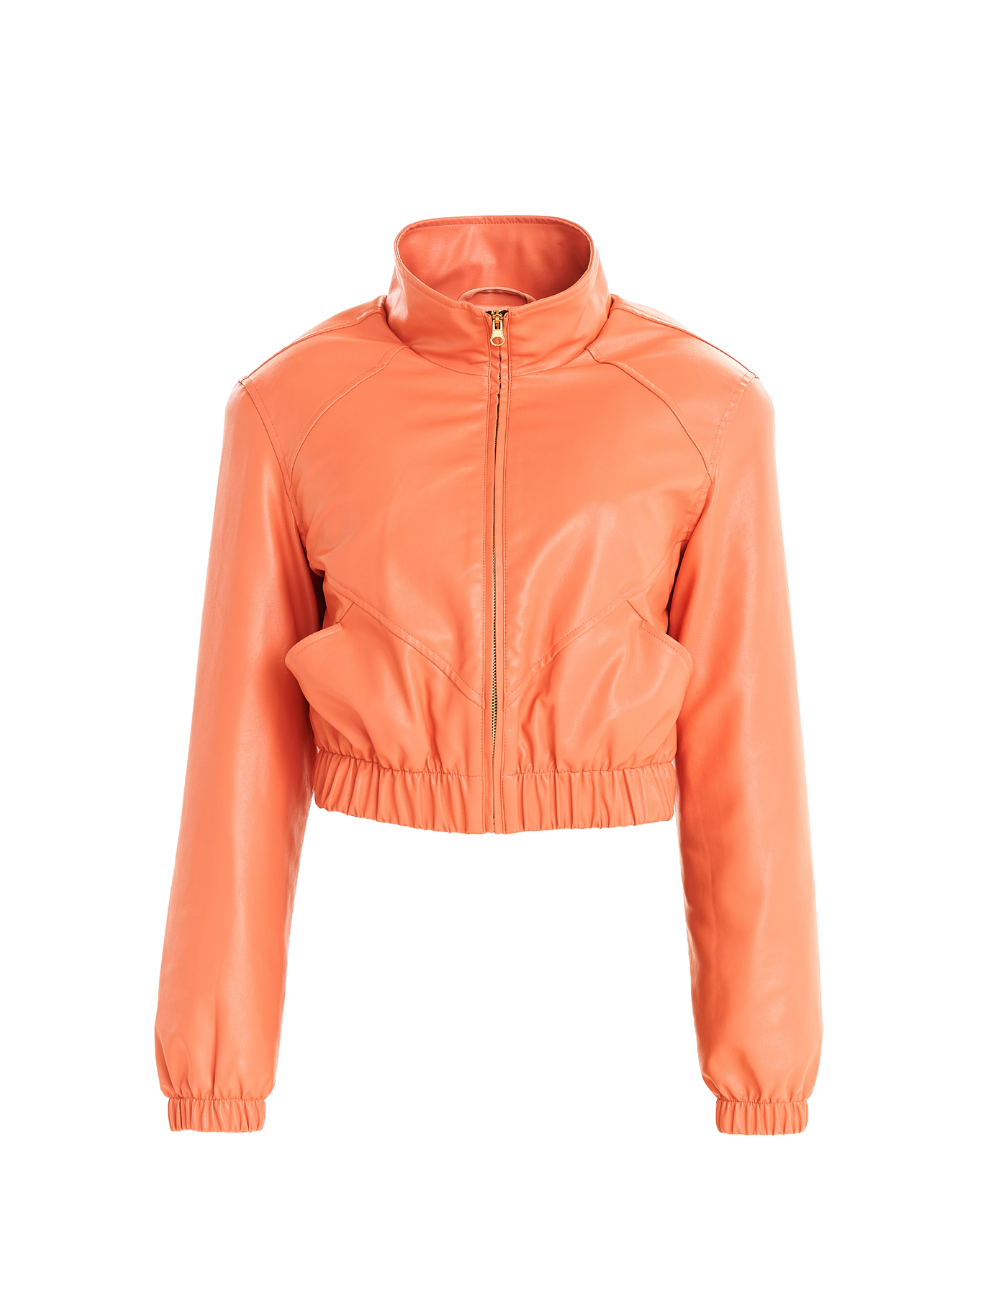 Shiloh cropped bomber spring coat peach pink vegan leather